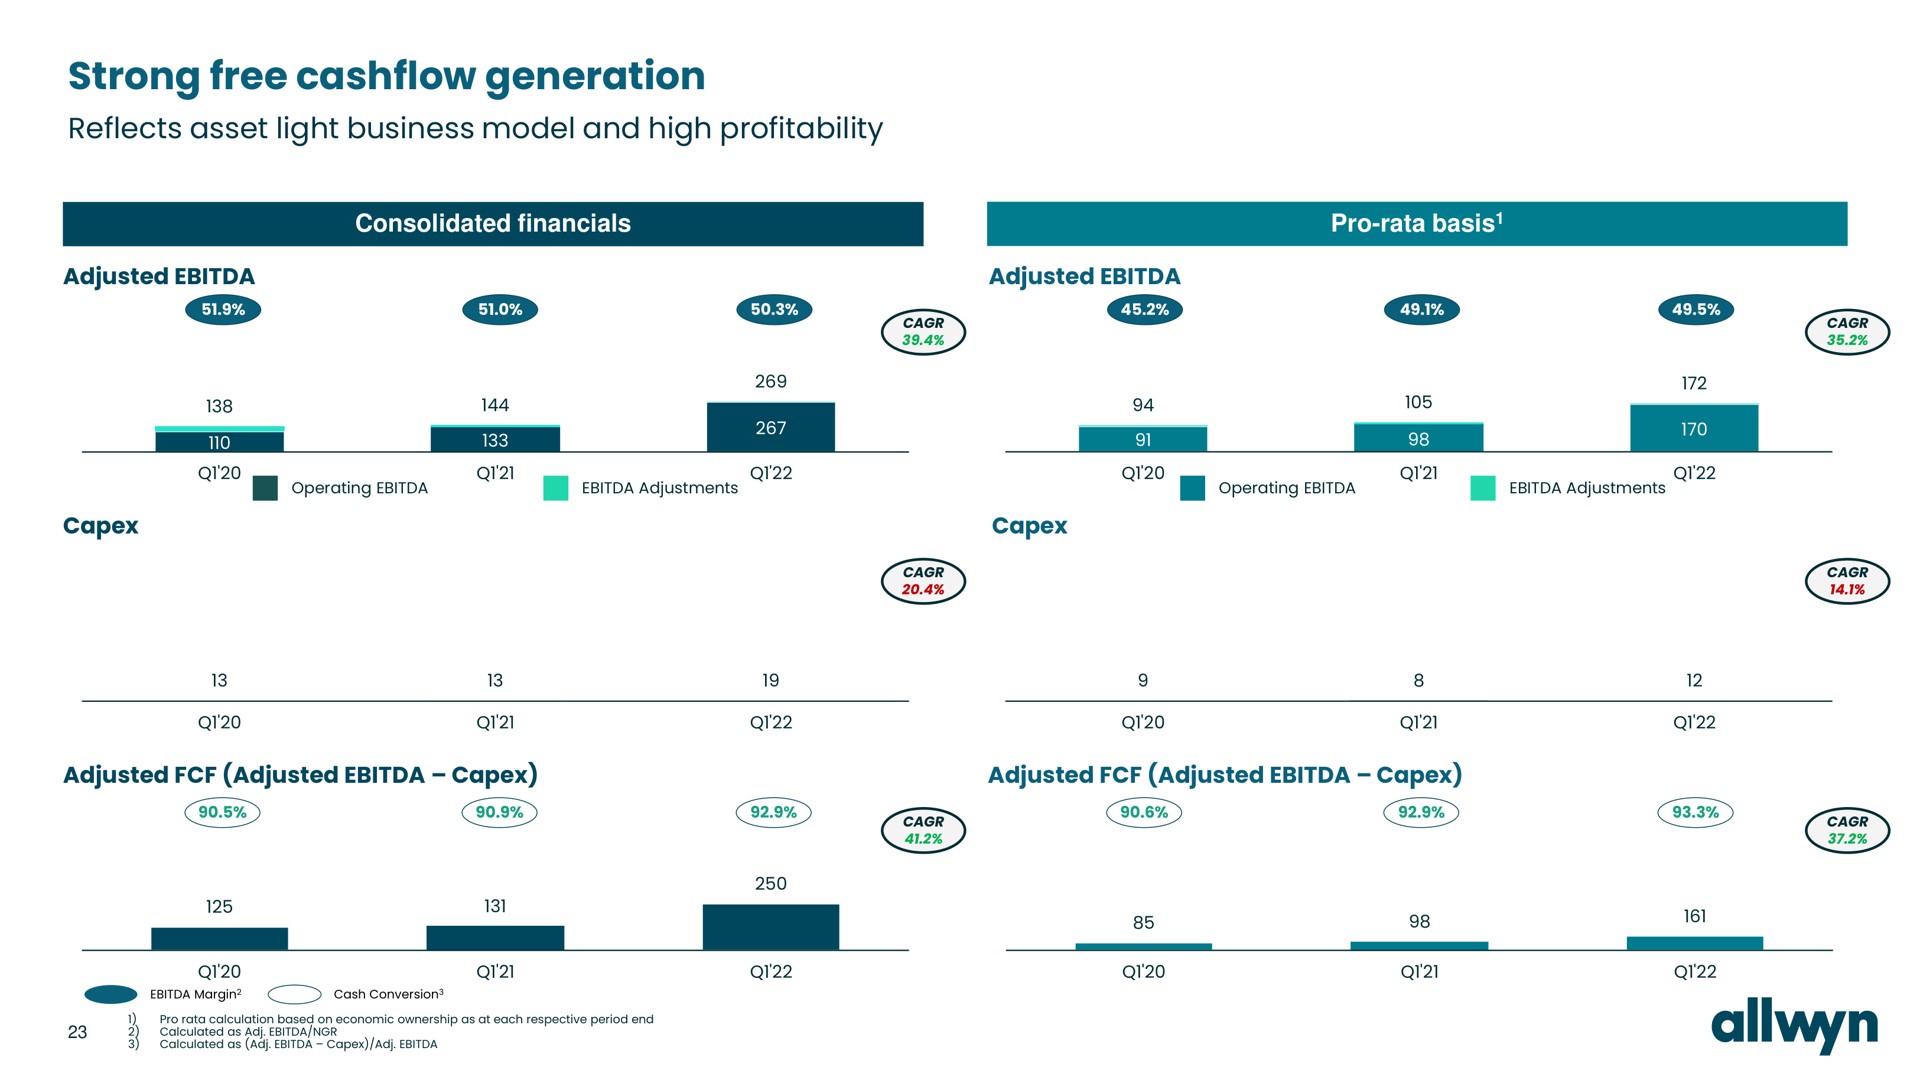 strong free generation reflects asset light business model and high profitability | Allwyn